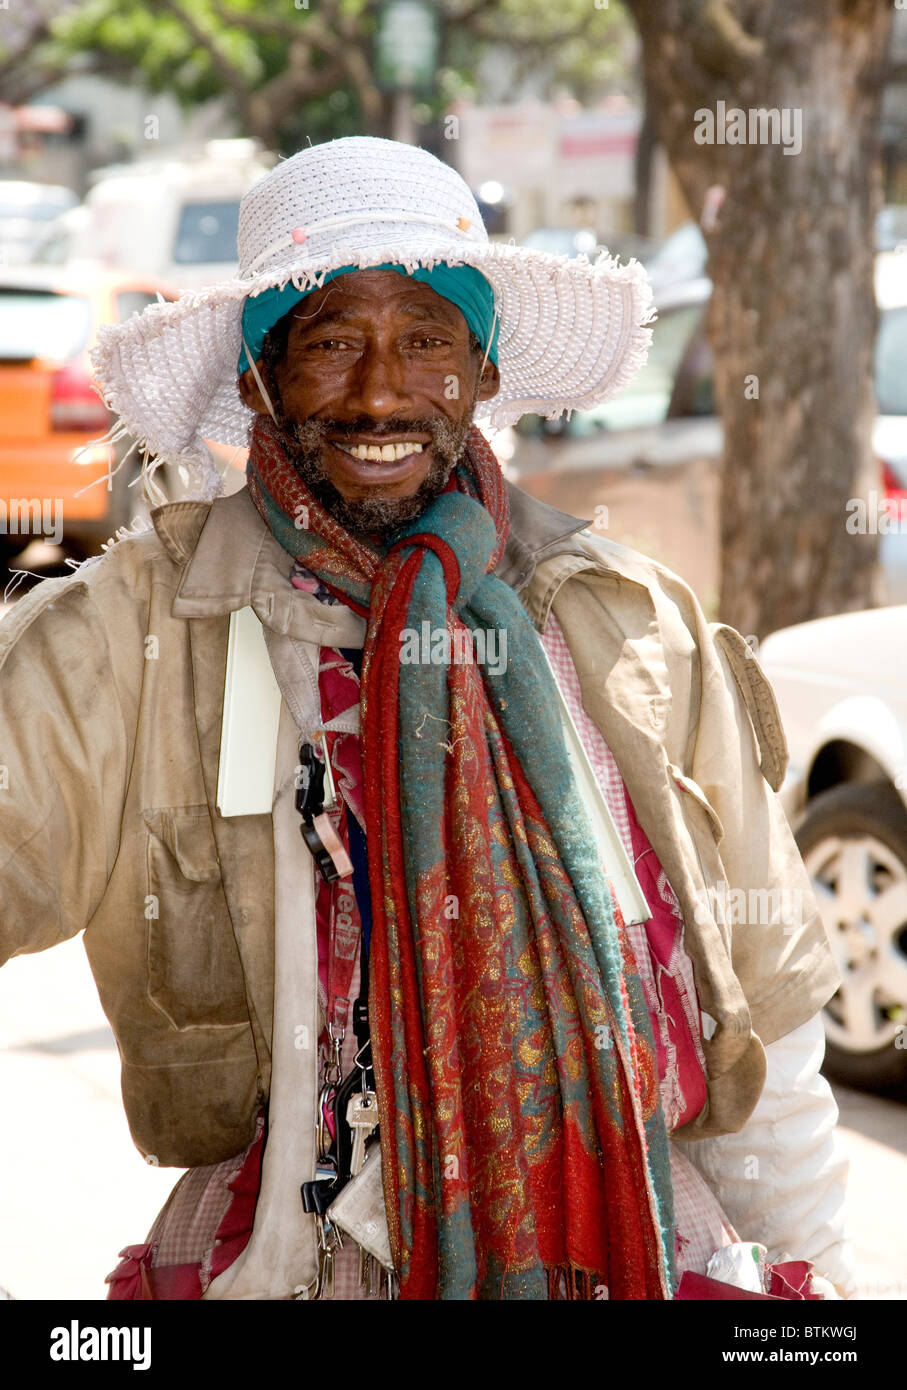 Local character in Pretoria, South Africa Stock Photo